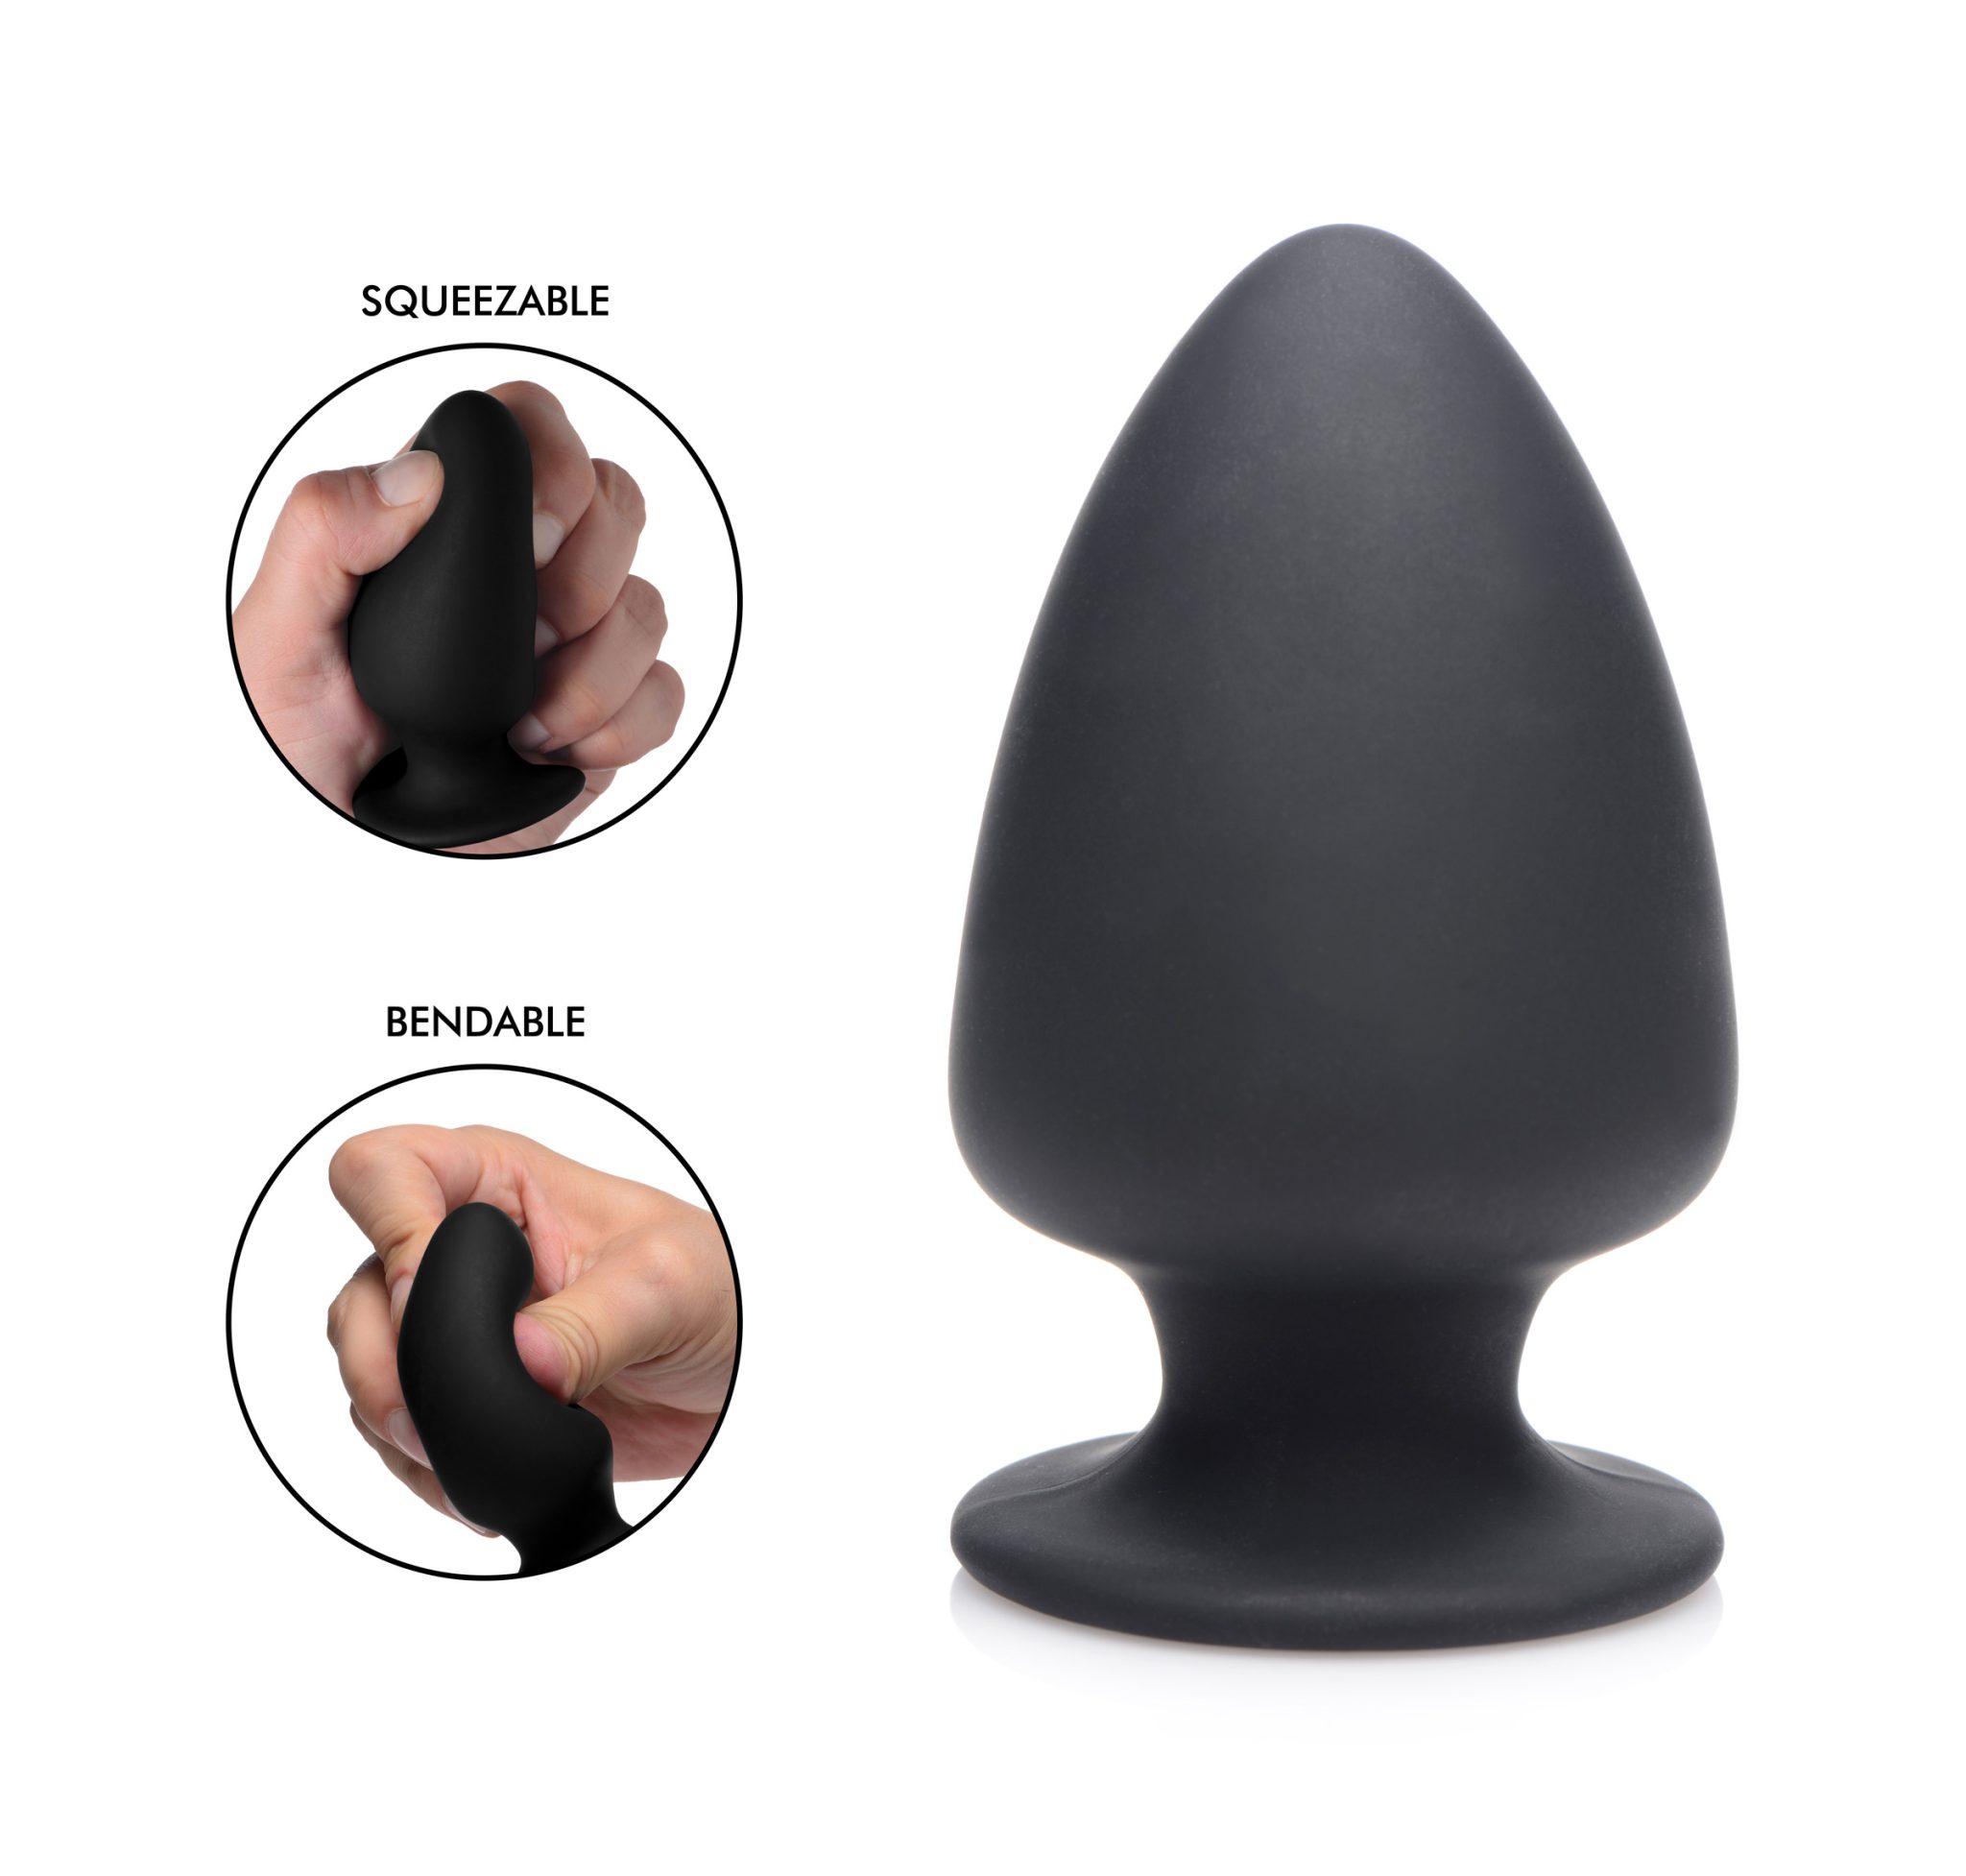 Squeezable Silicone Anal Plug – Small